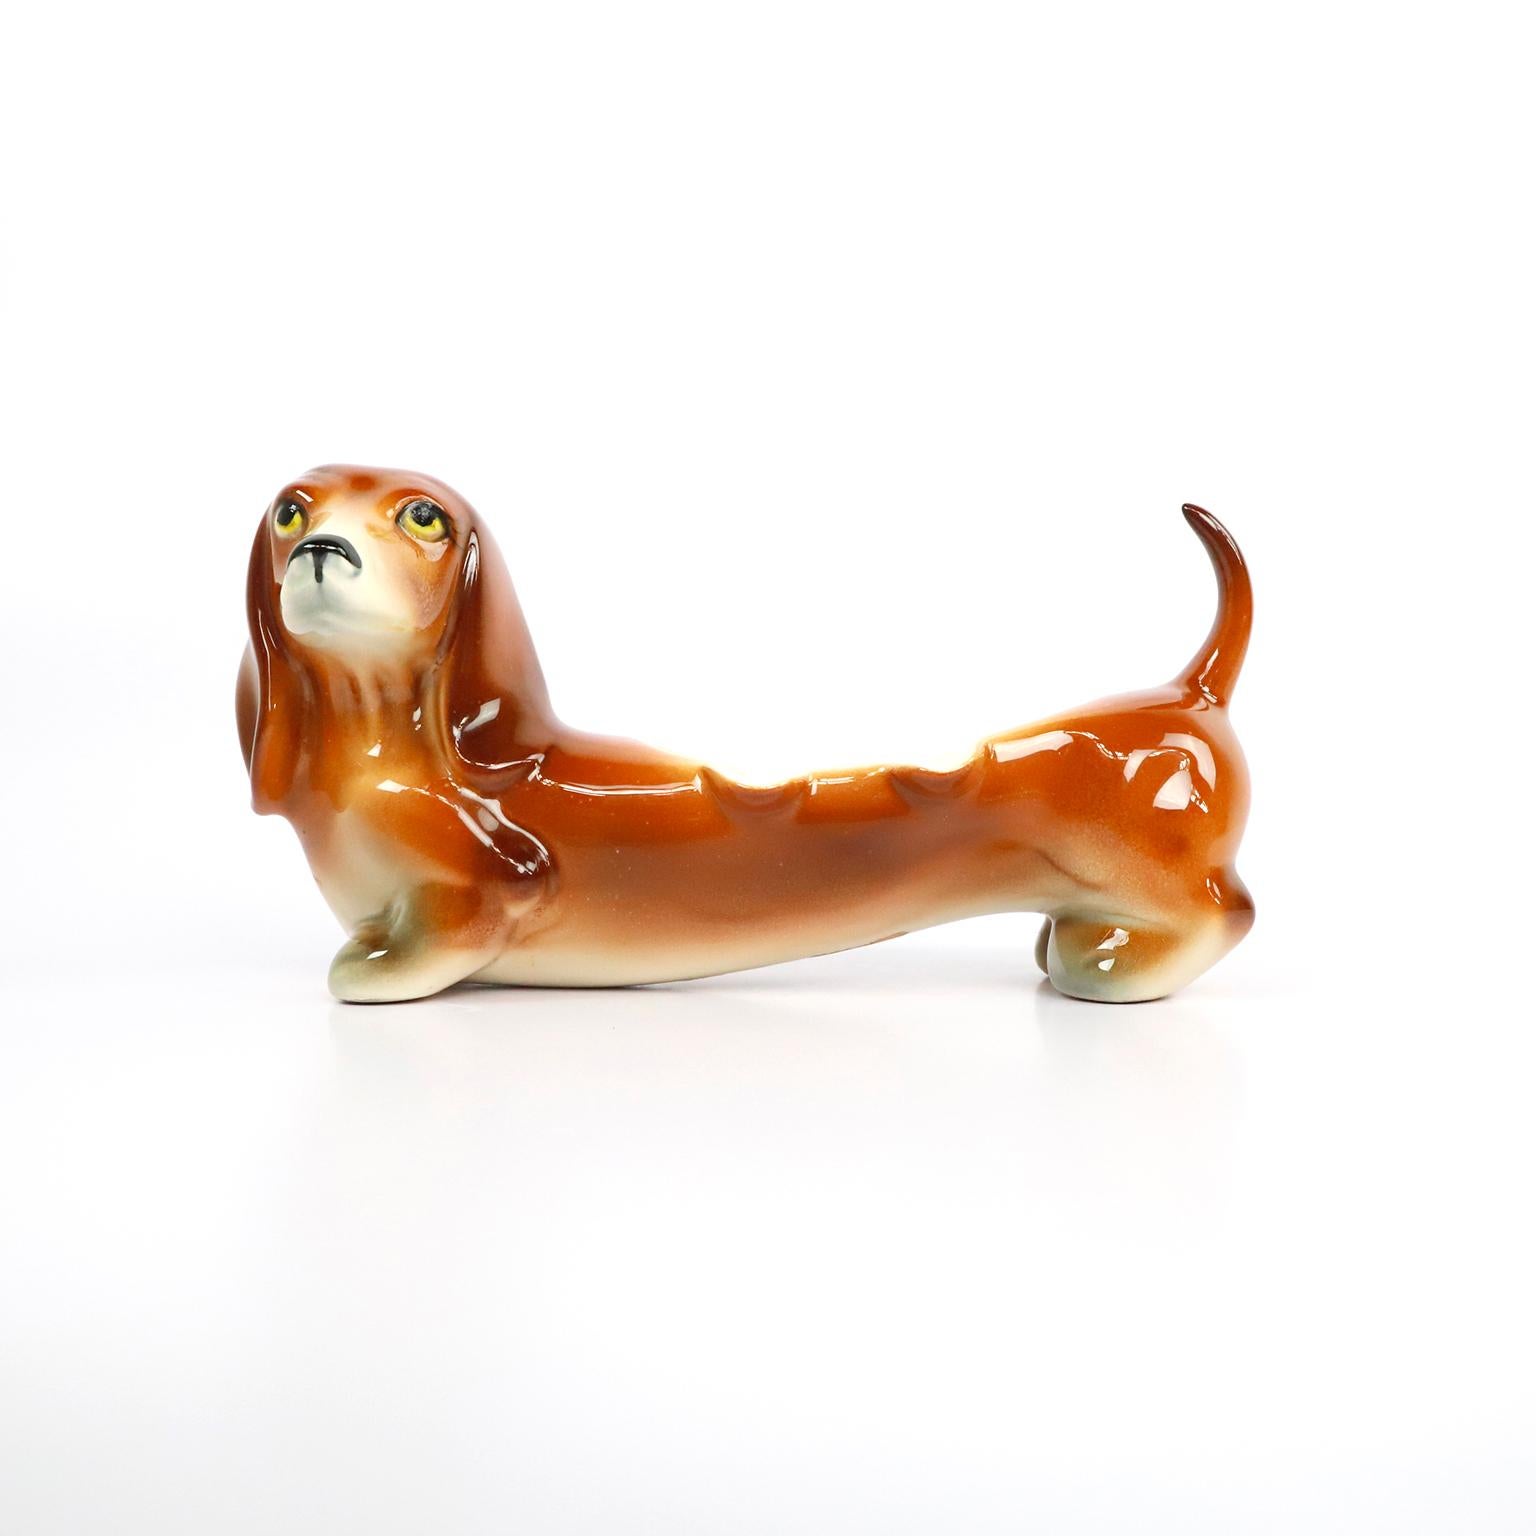 Circa 1970, We offer this Mexican Ashtray in dog shape made in Ceramic by Cerámica de Cuernavaca, great vintage conditions.